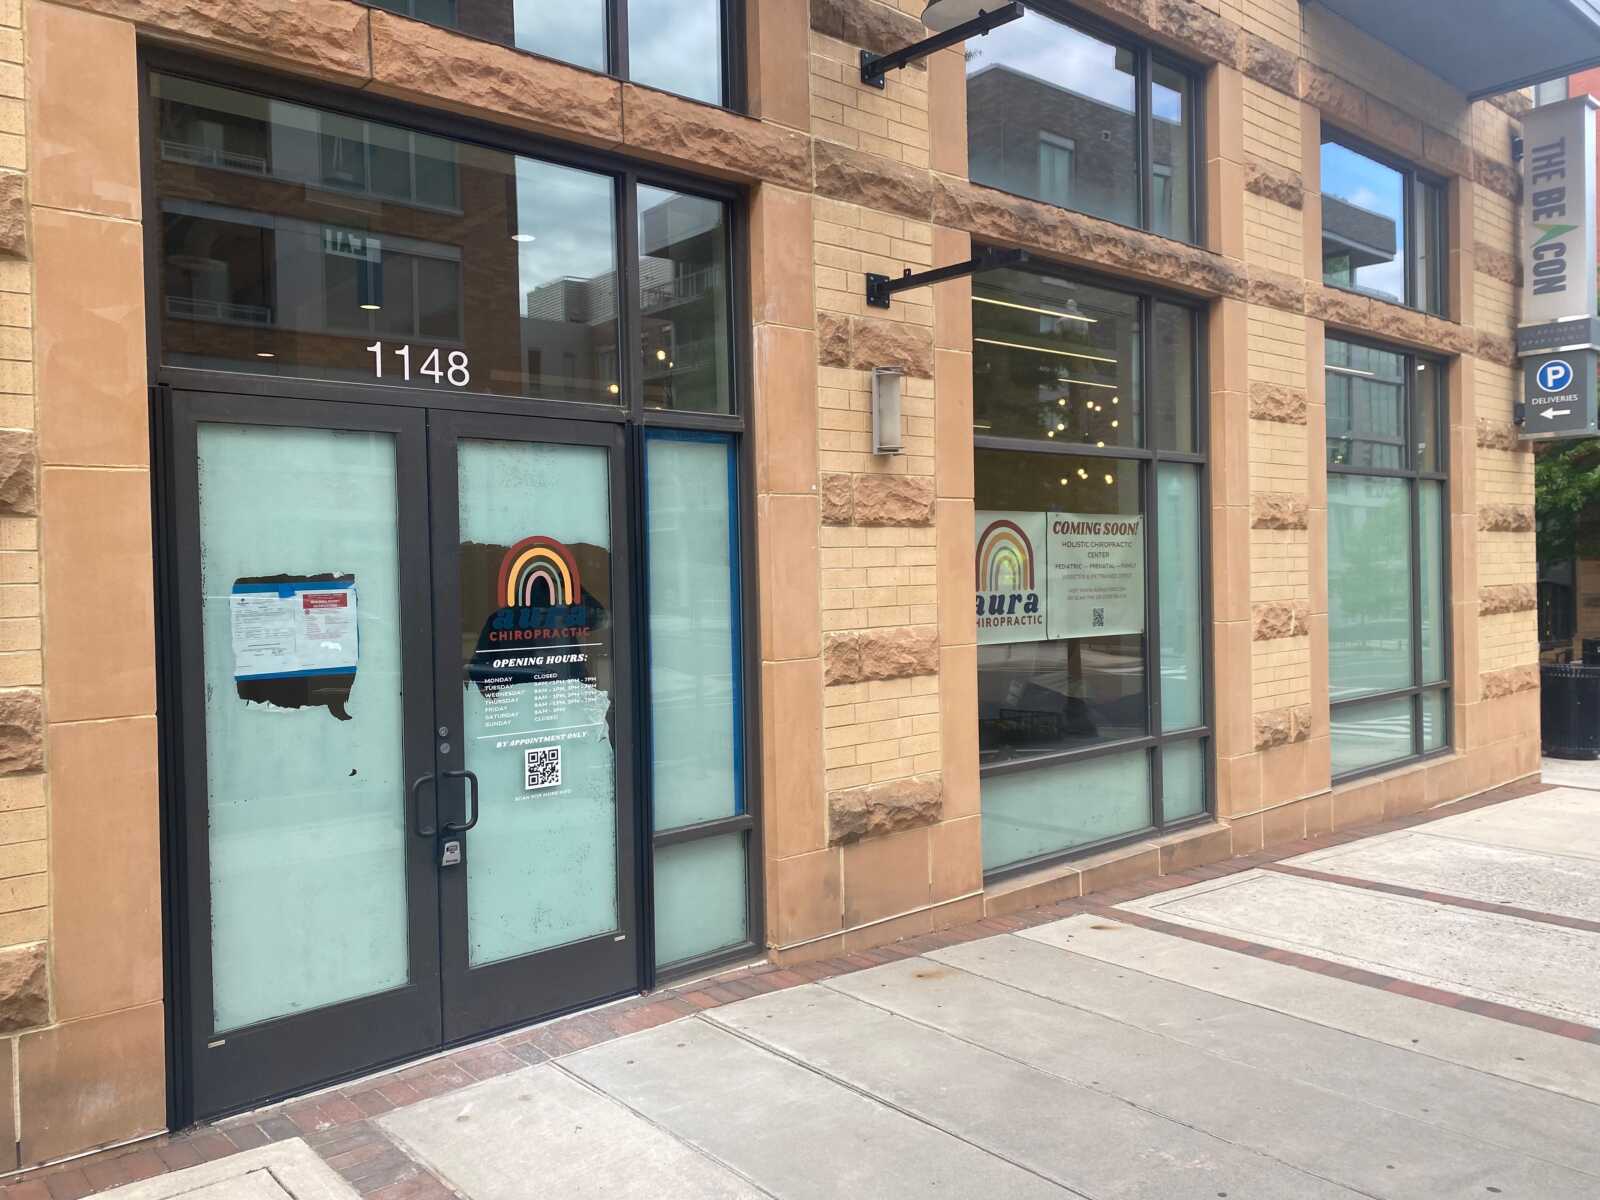 New chiropractic clinic focused on women’s health and pediatric care opening in Clarendon | ARLnow.com